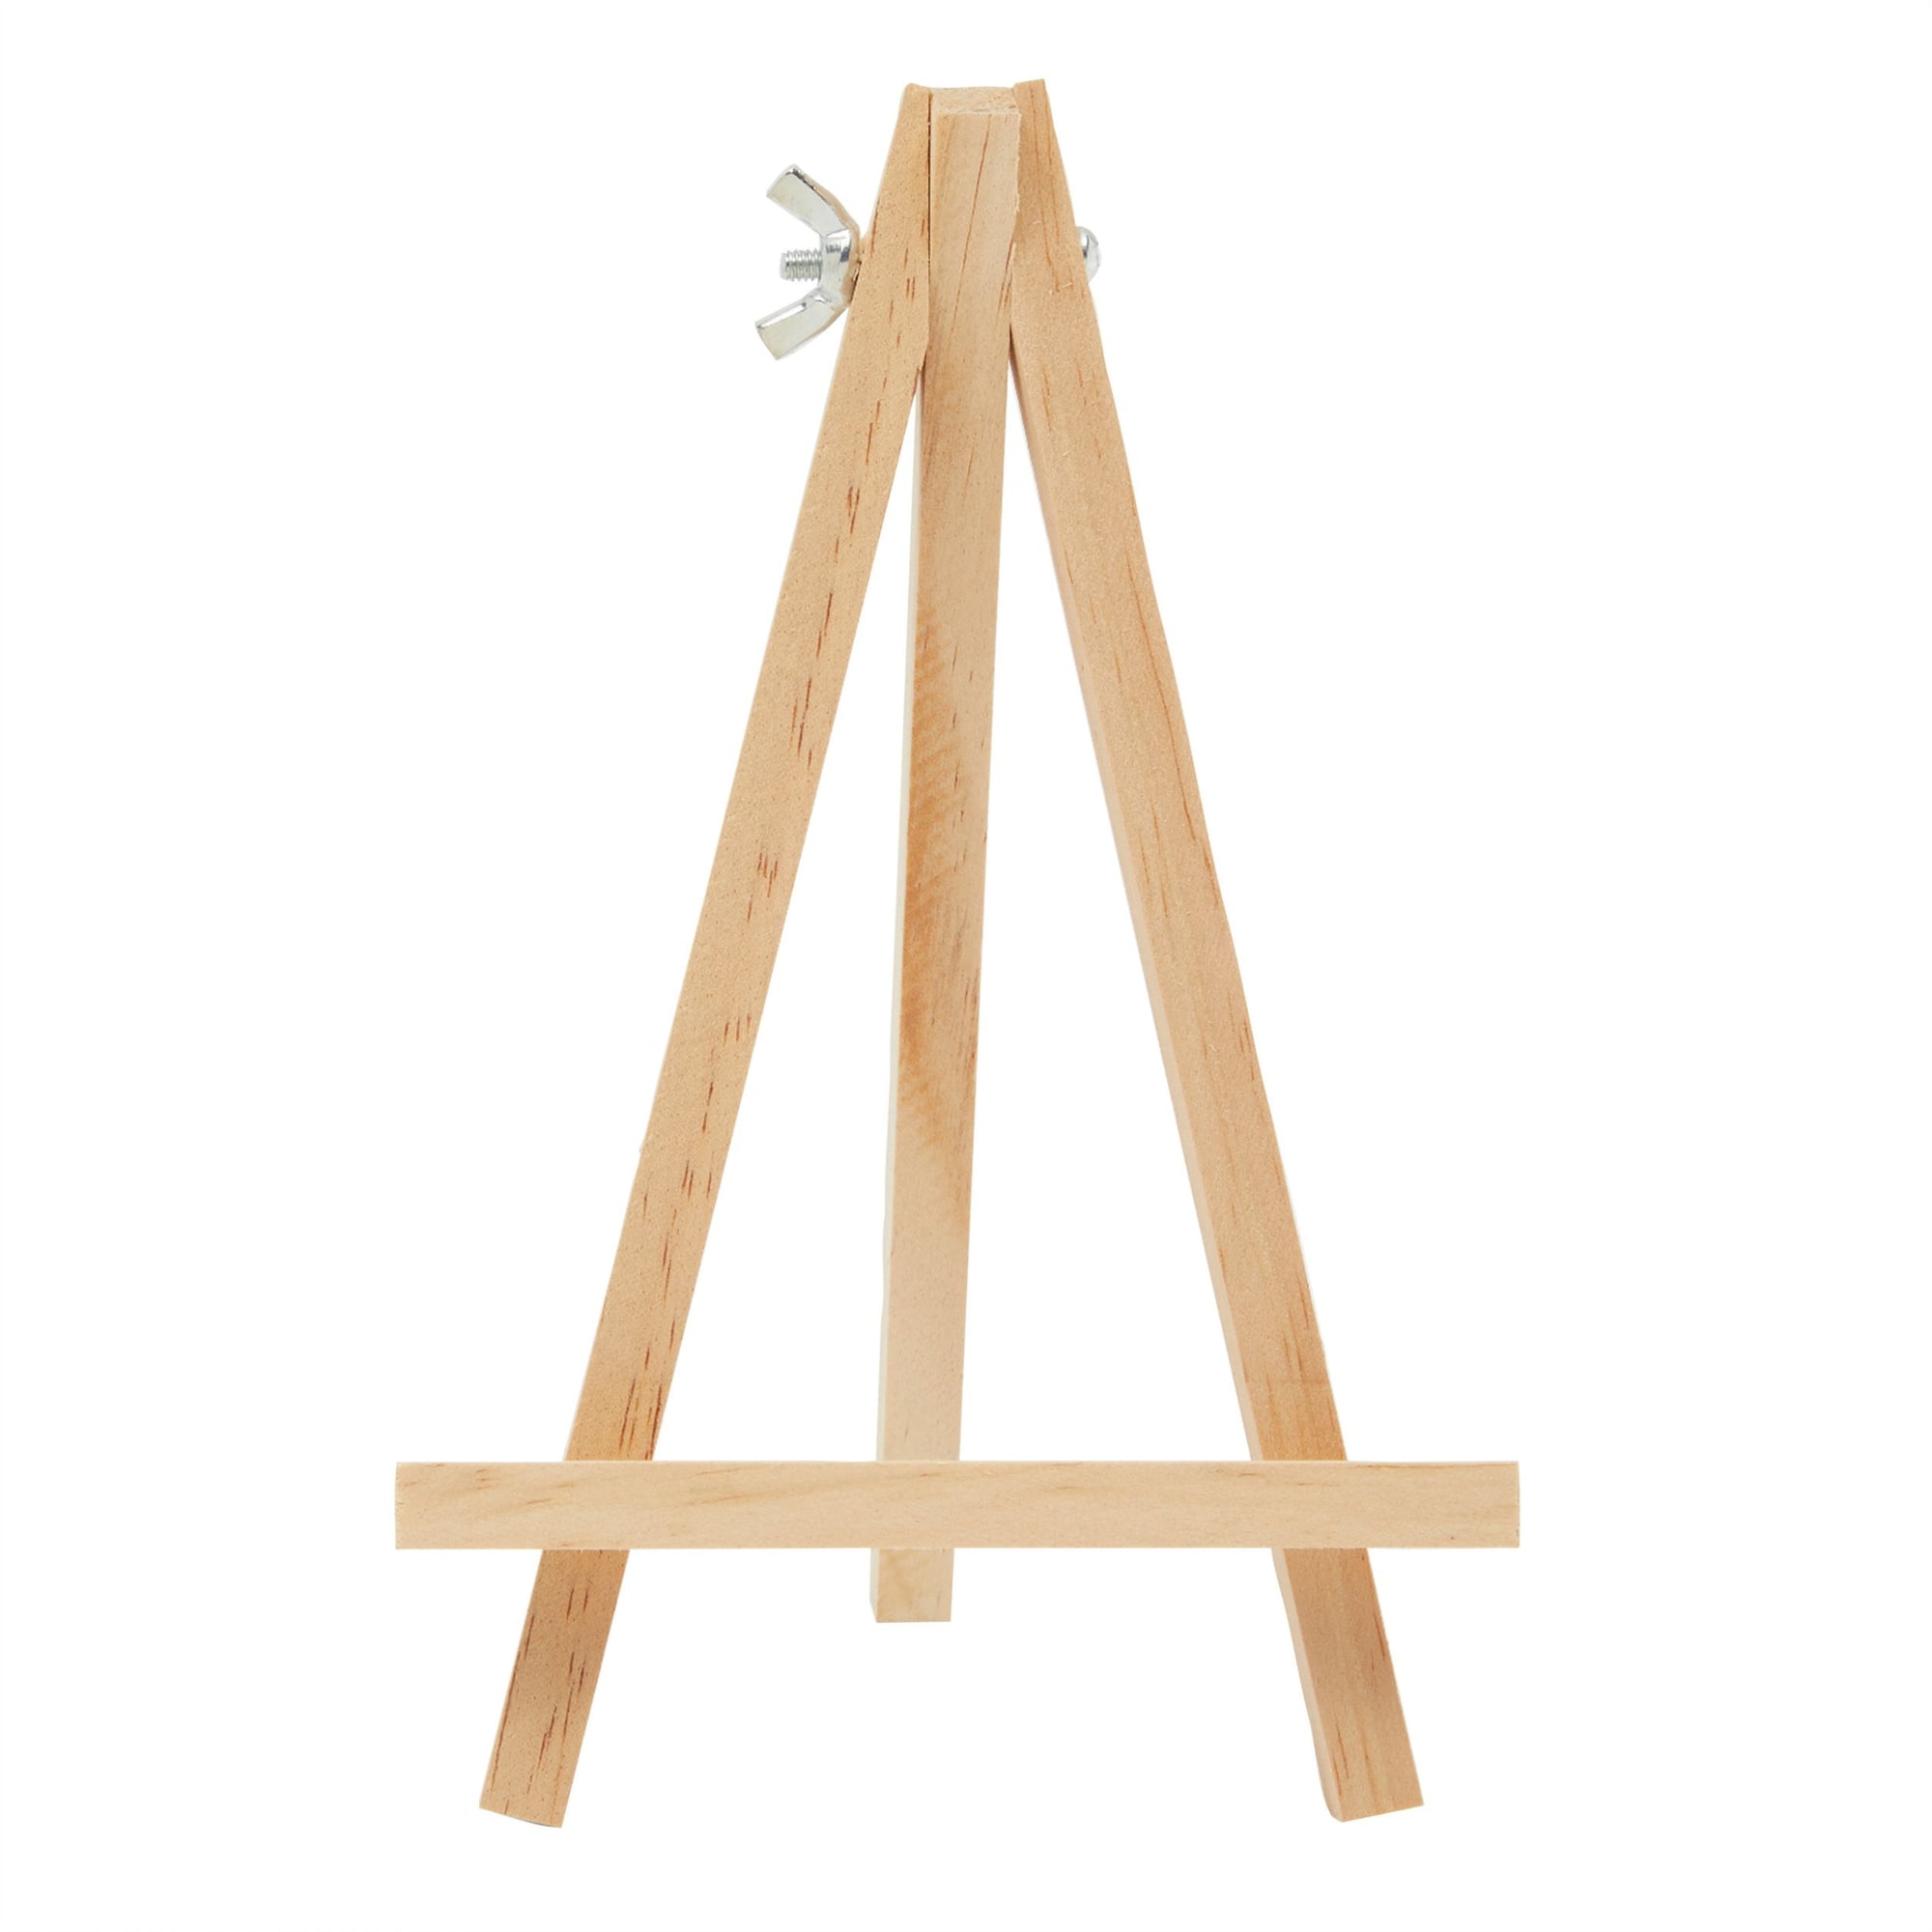 8 Small Black Wood Display Easel (6 Pack), A-Frame Artist Tripod Mini Easel  - Tabletop Stand, 8” - 6 Pack - Metro Market